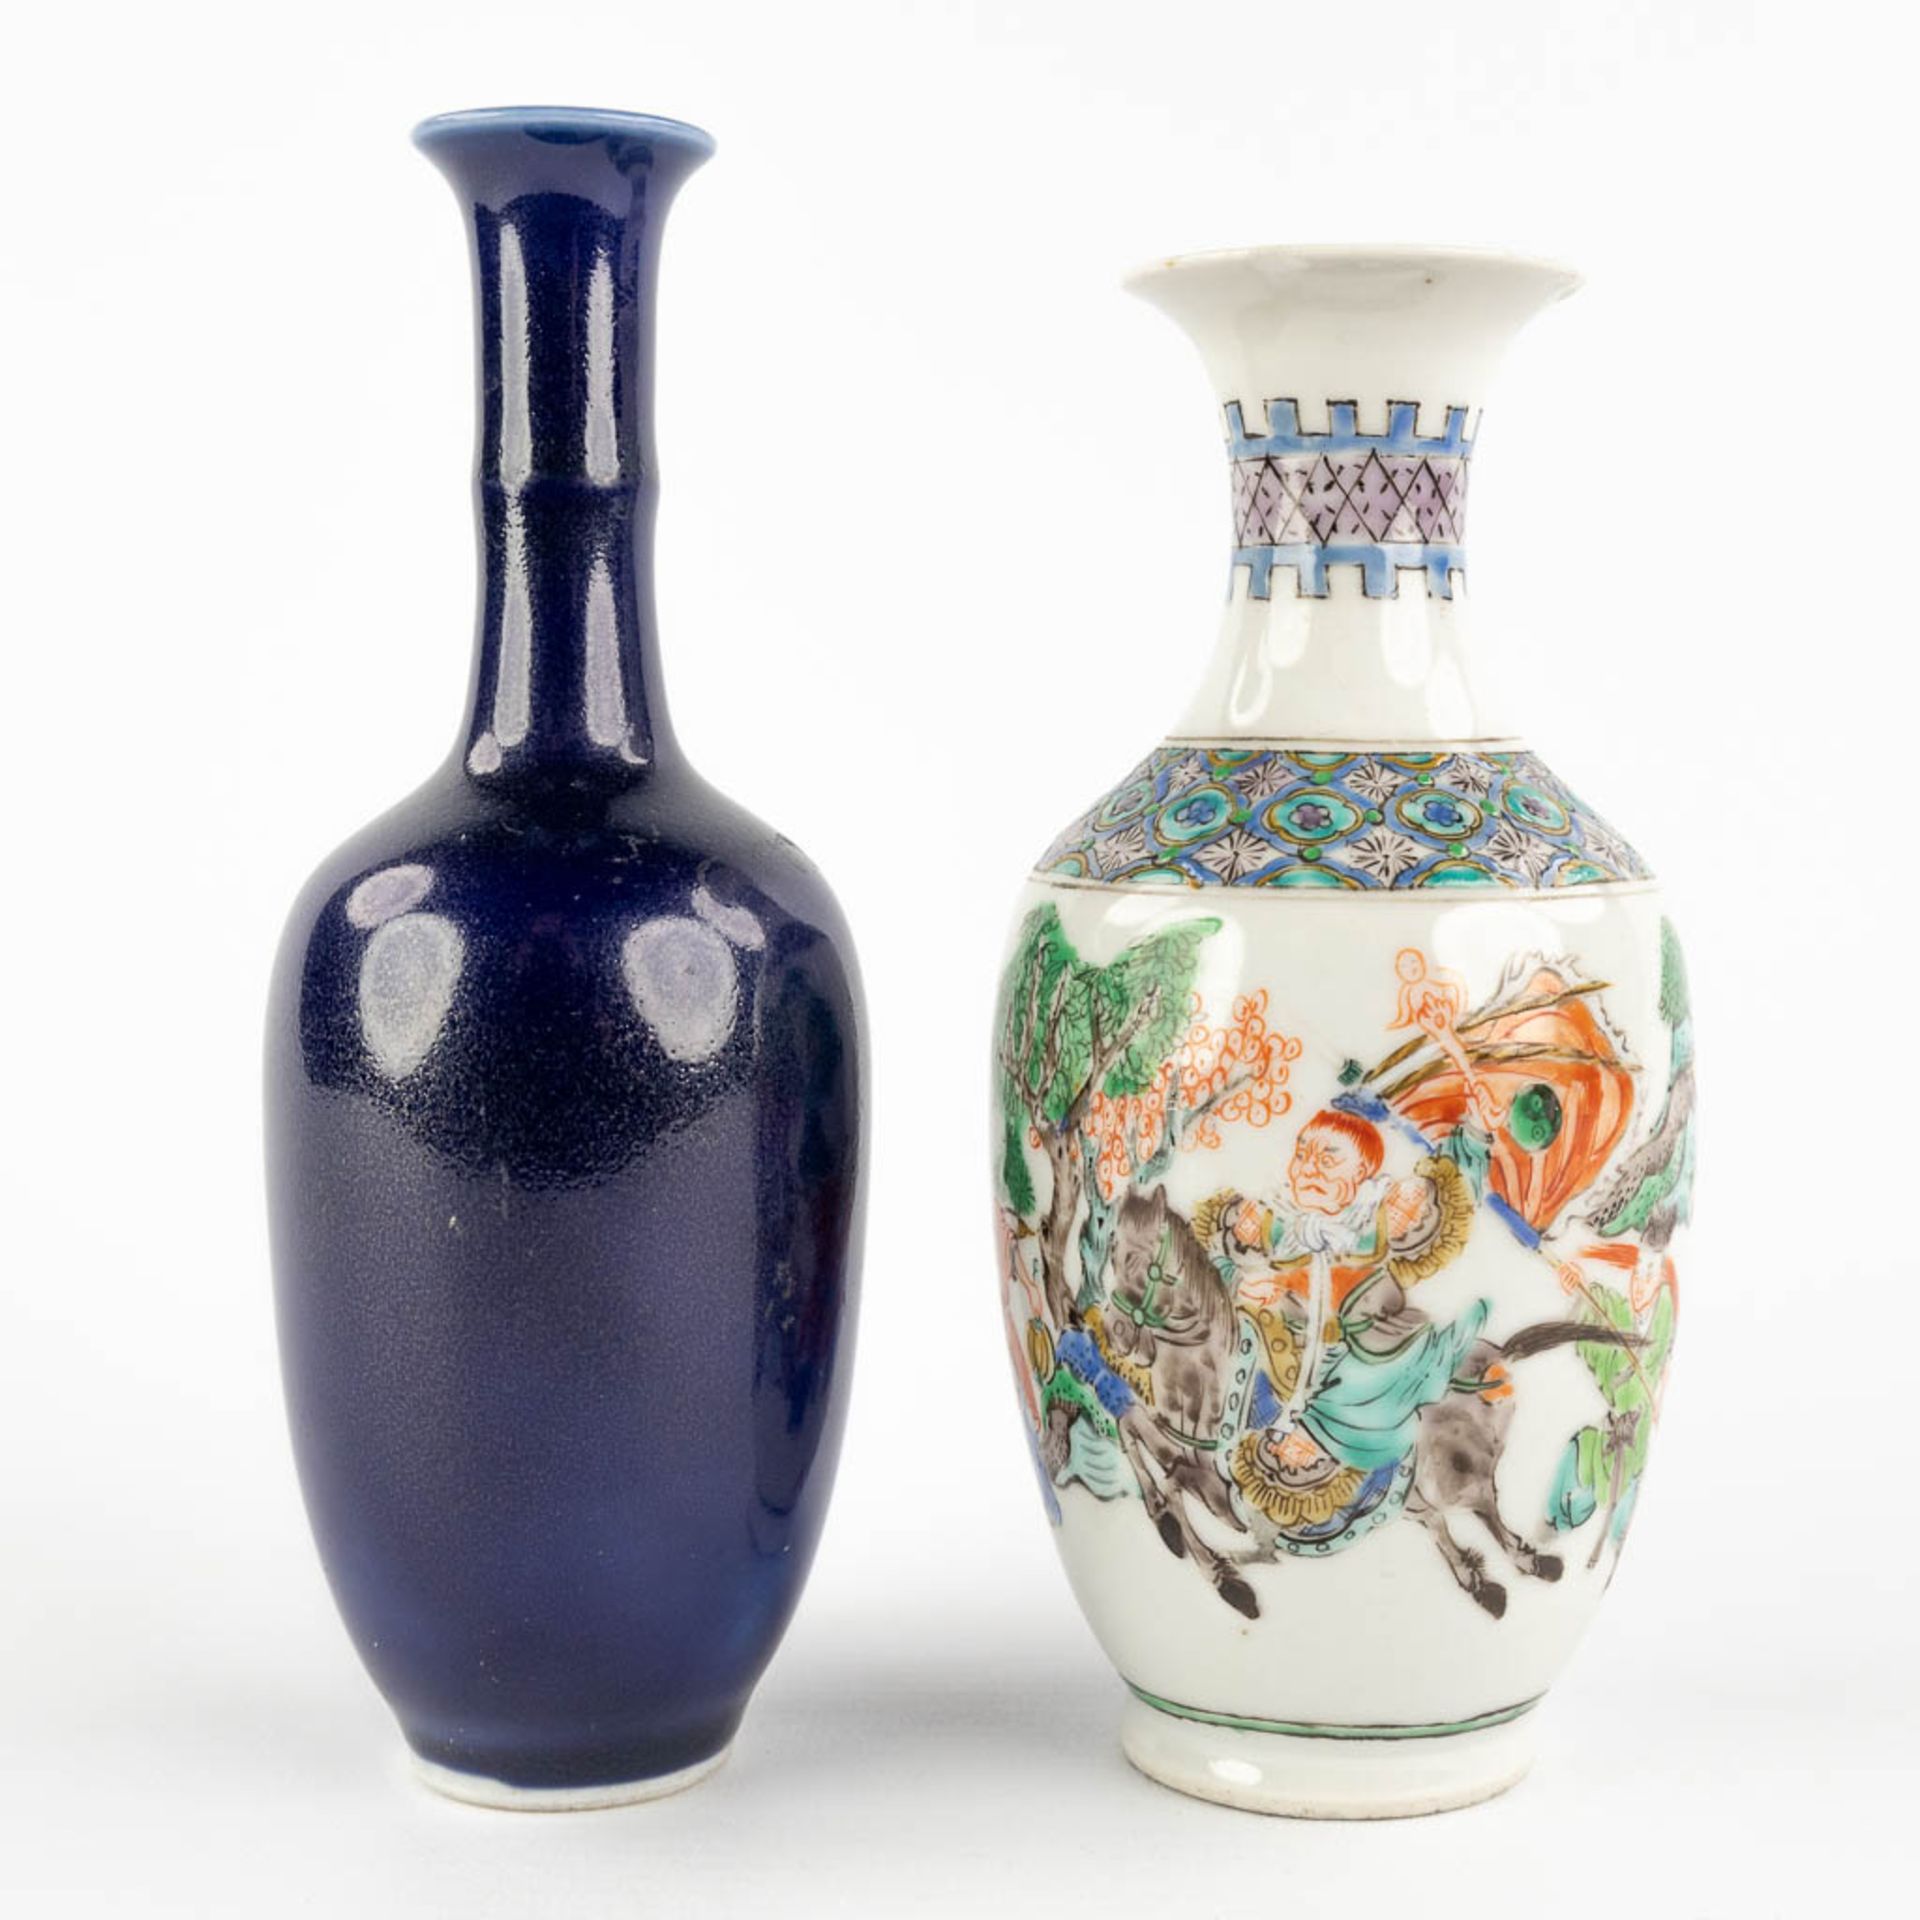 Two small Chinese vases, Famille Verte and monochrome, 19th C. (H:15 x D:7 cm) - Bild 3 aus 11